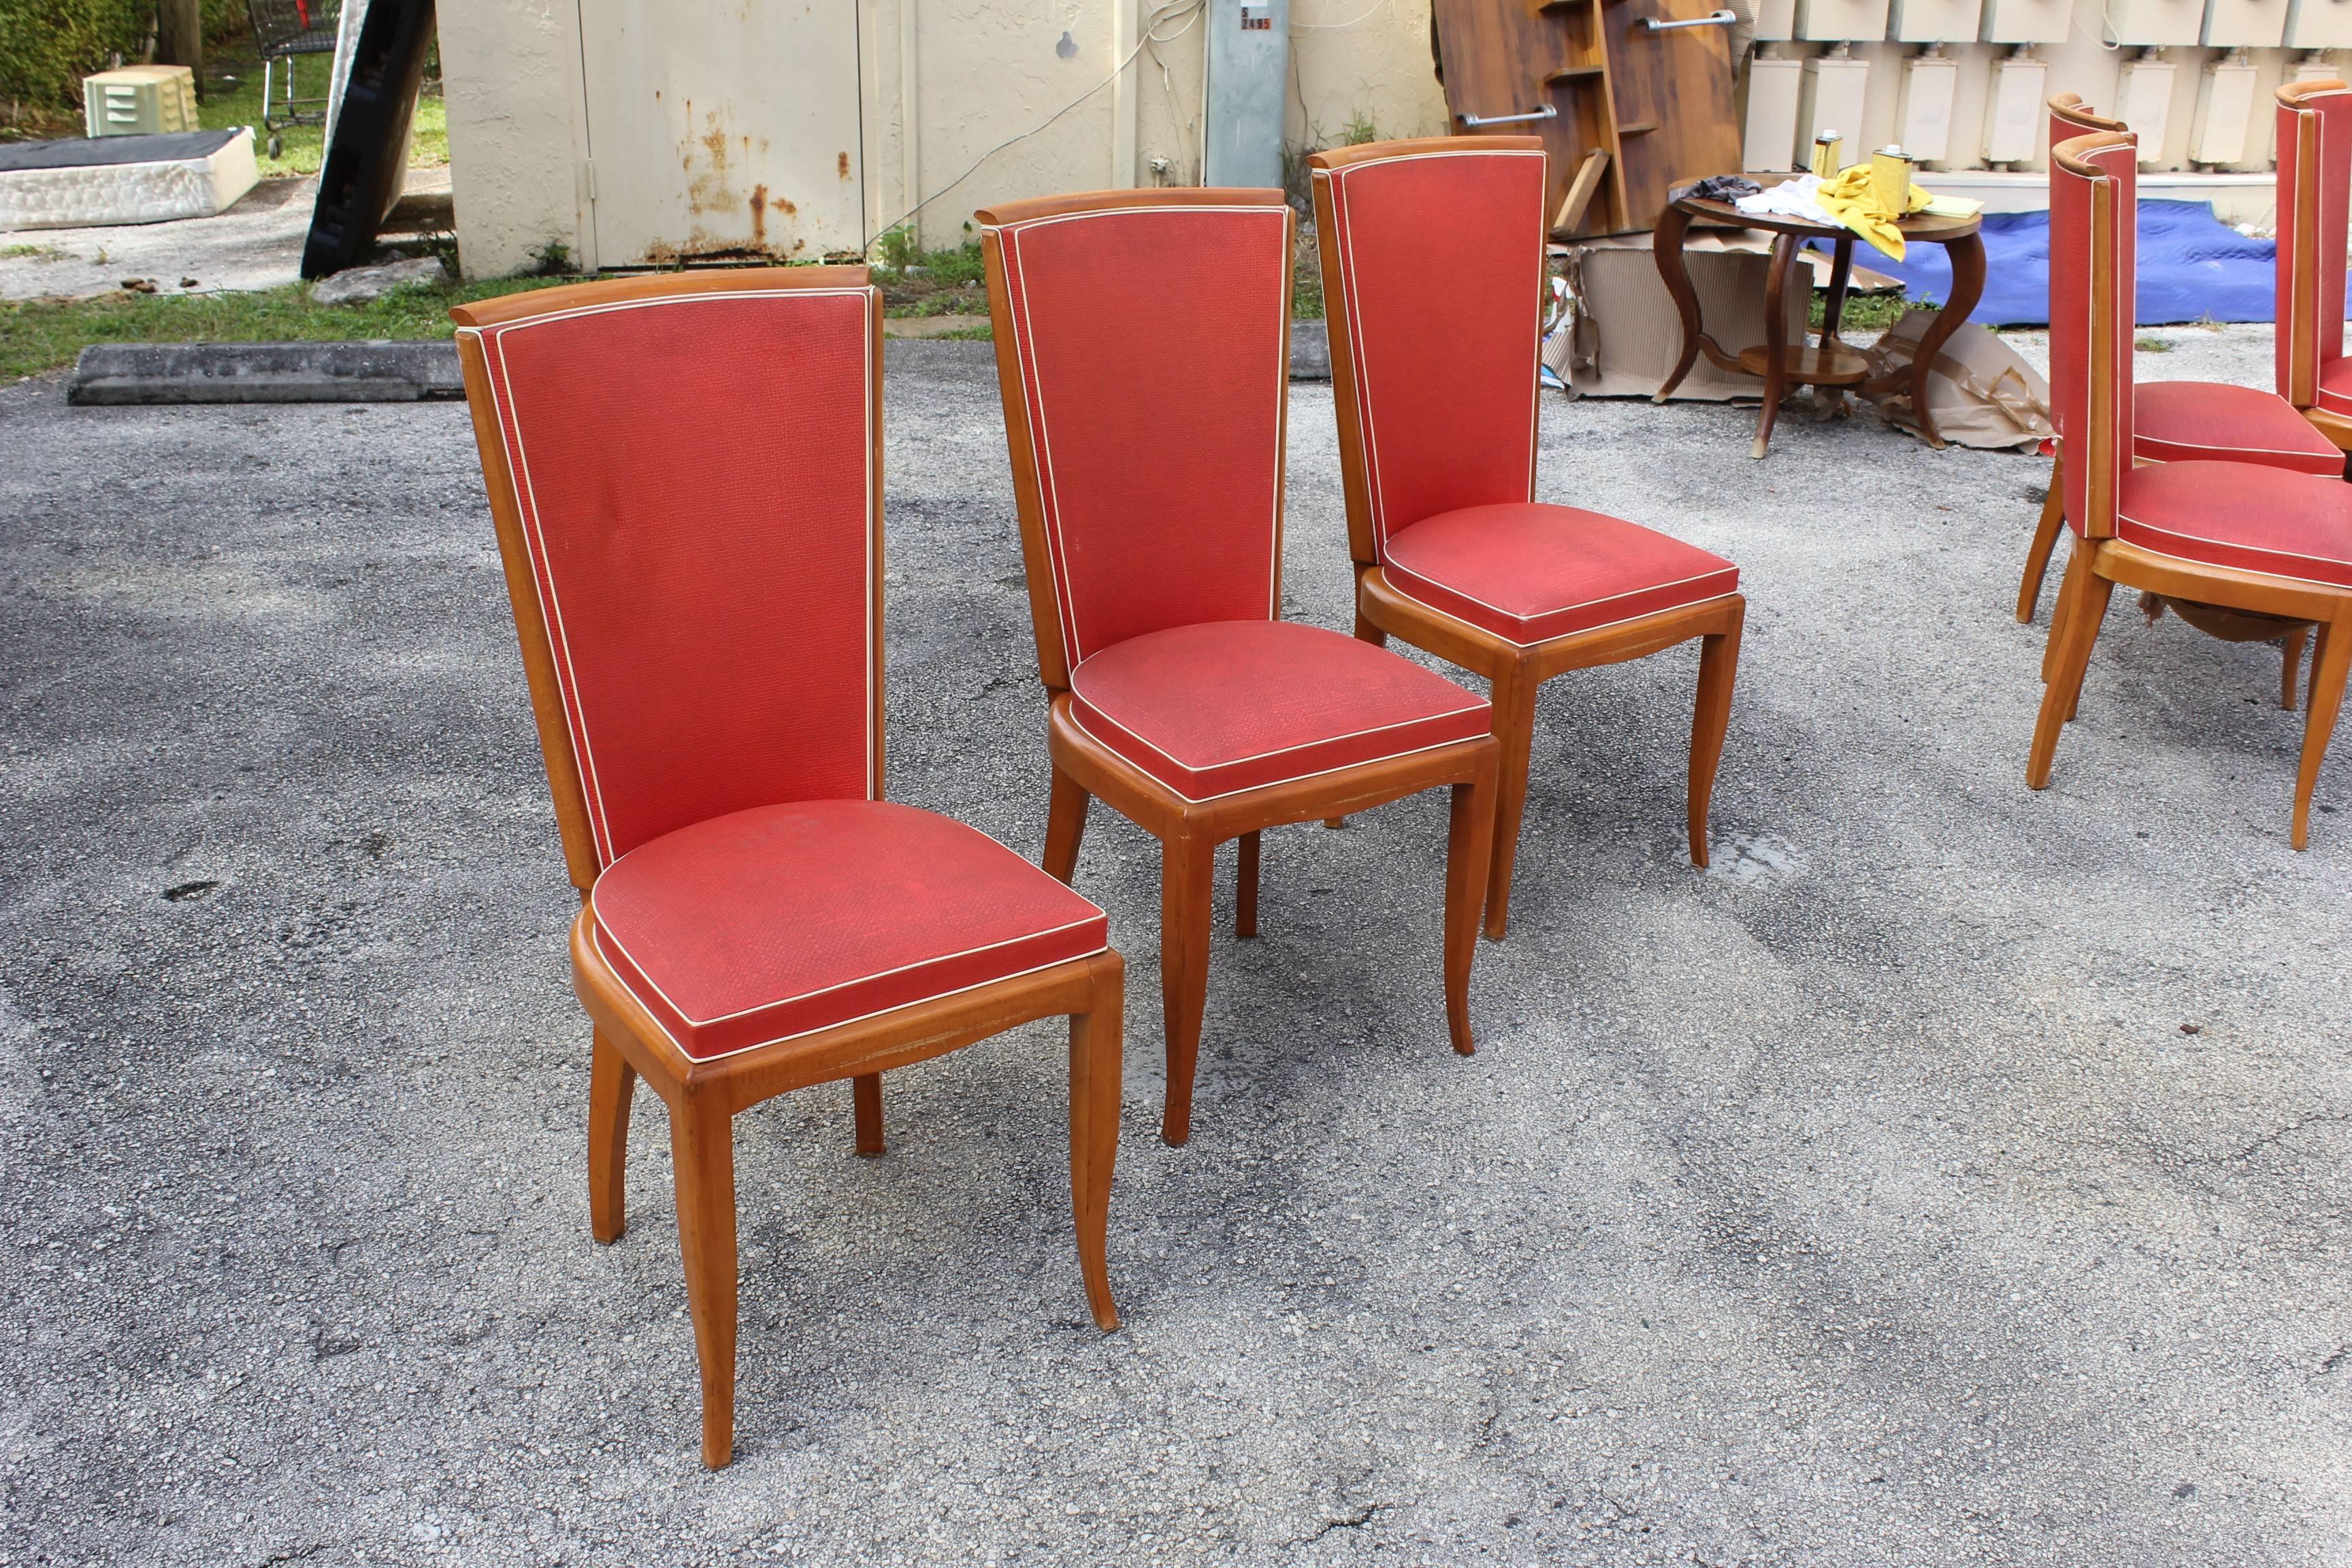 Suite of six French Art Deco dining chairs, solid mahogany, beautiful chairs.( Reupholstery Need to be changed recommended.),circa 1940 from France, Paris.